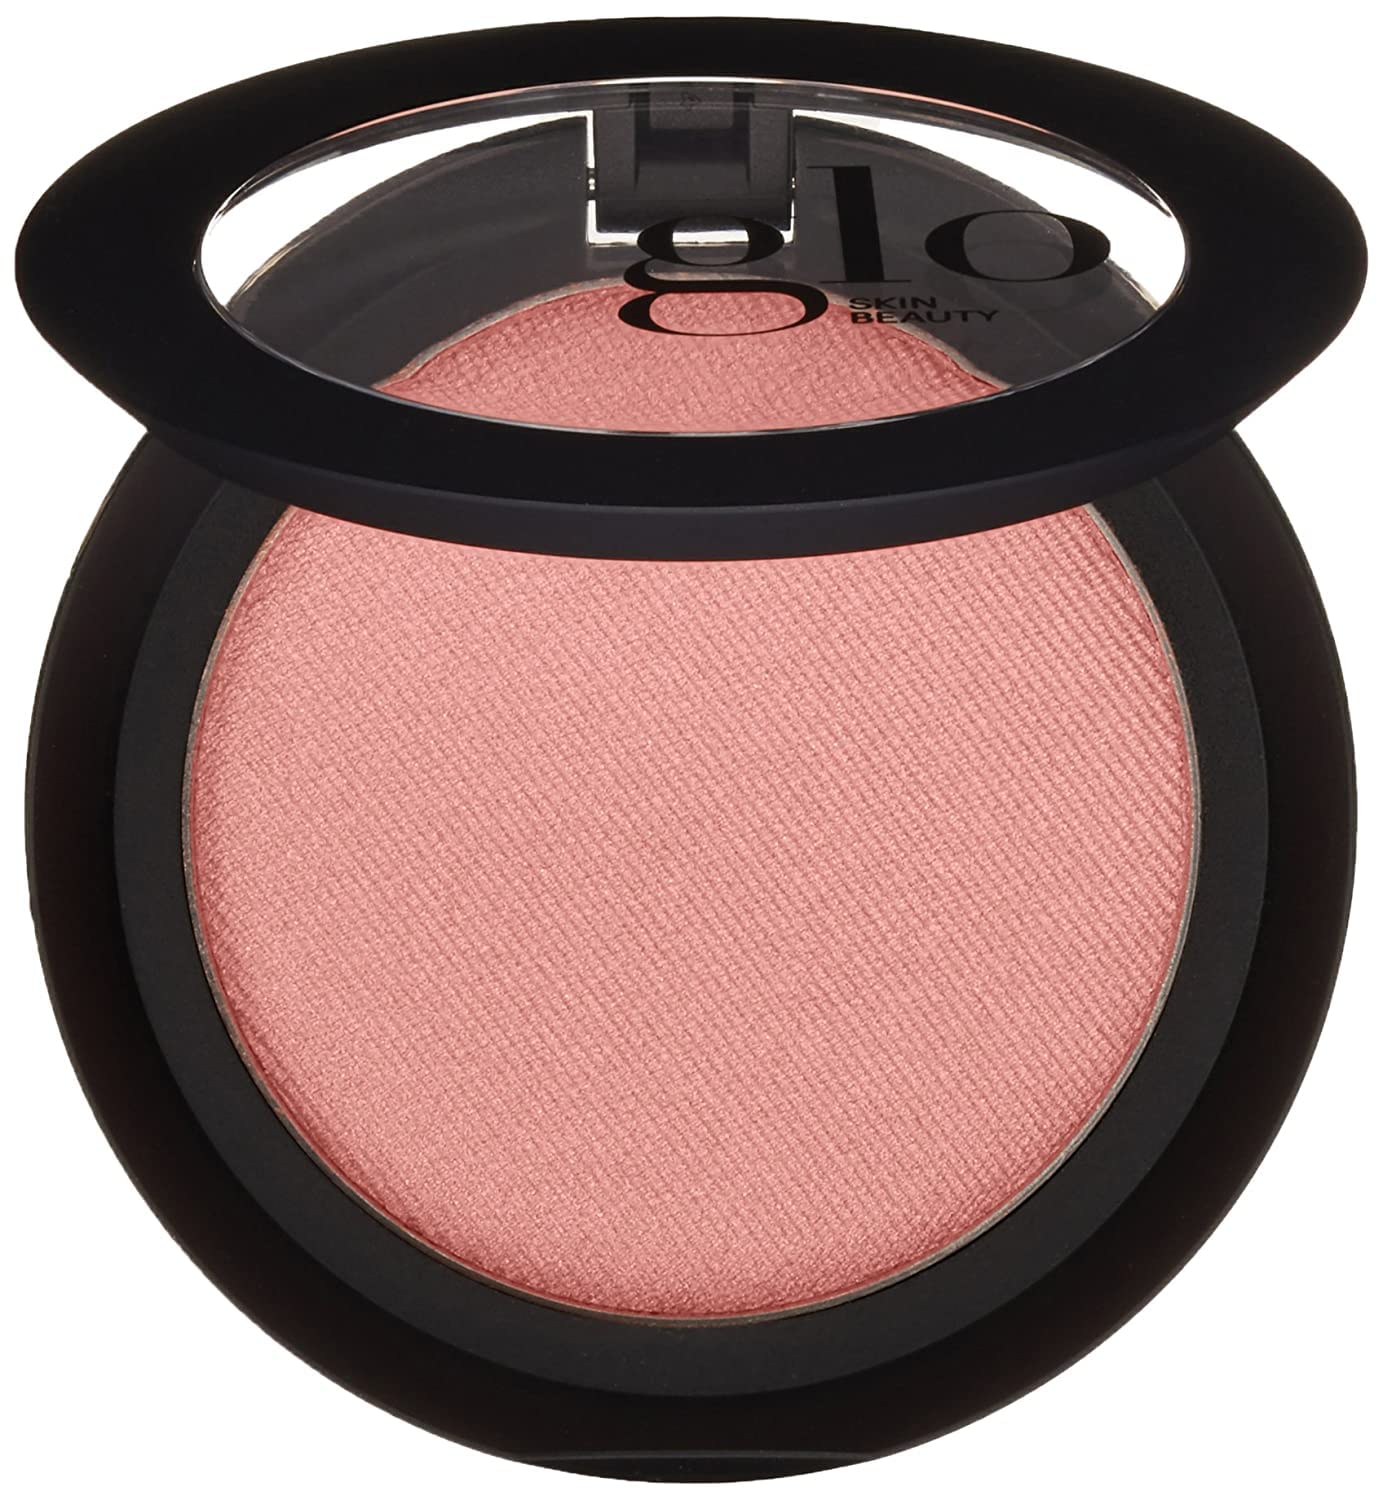 Glo Skin Beauty Blush | High Pigment Makeup to Accentuate the Cheekbones and Create A Natural, Healthy Glow, (Melody)